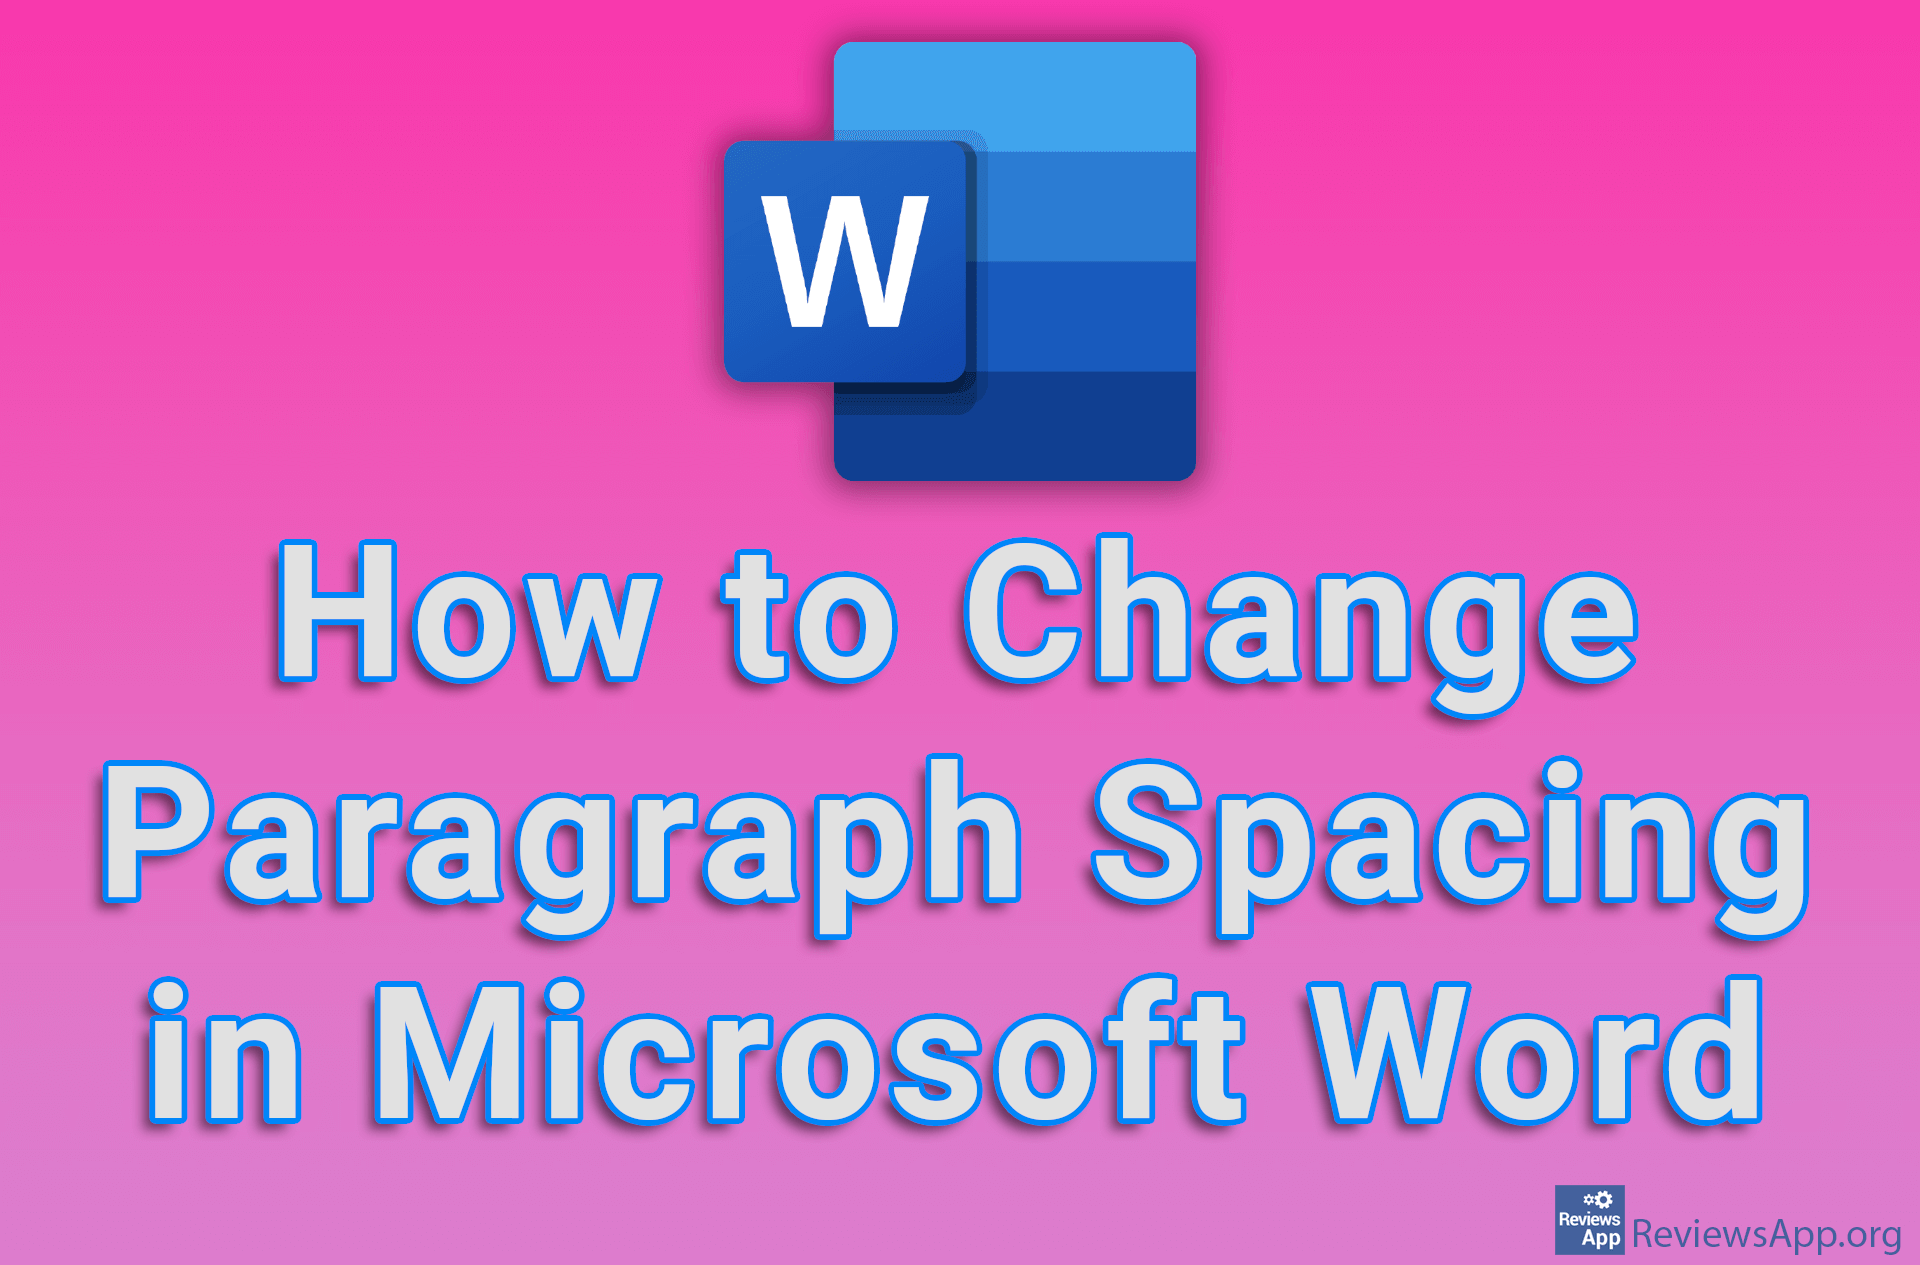 How to Change Paragraph Spacing in Microsoft Word